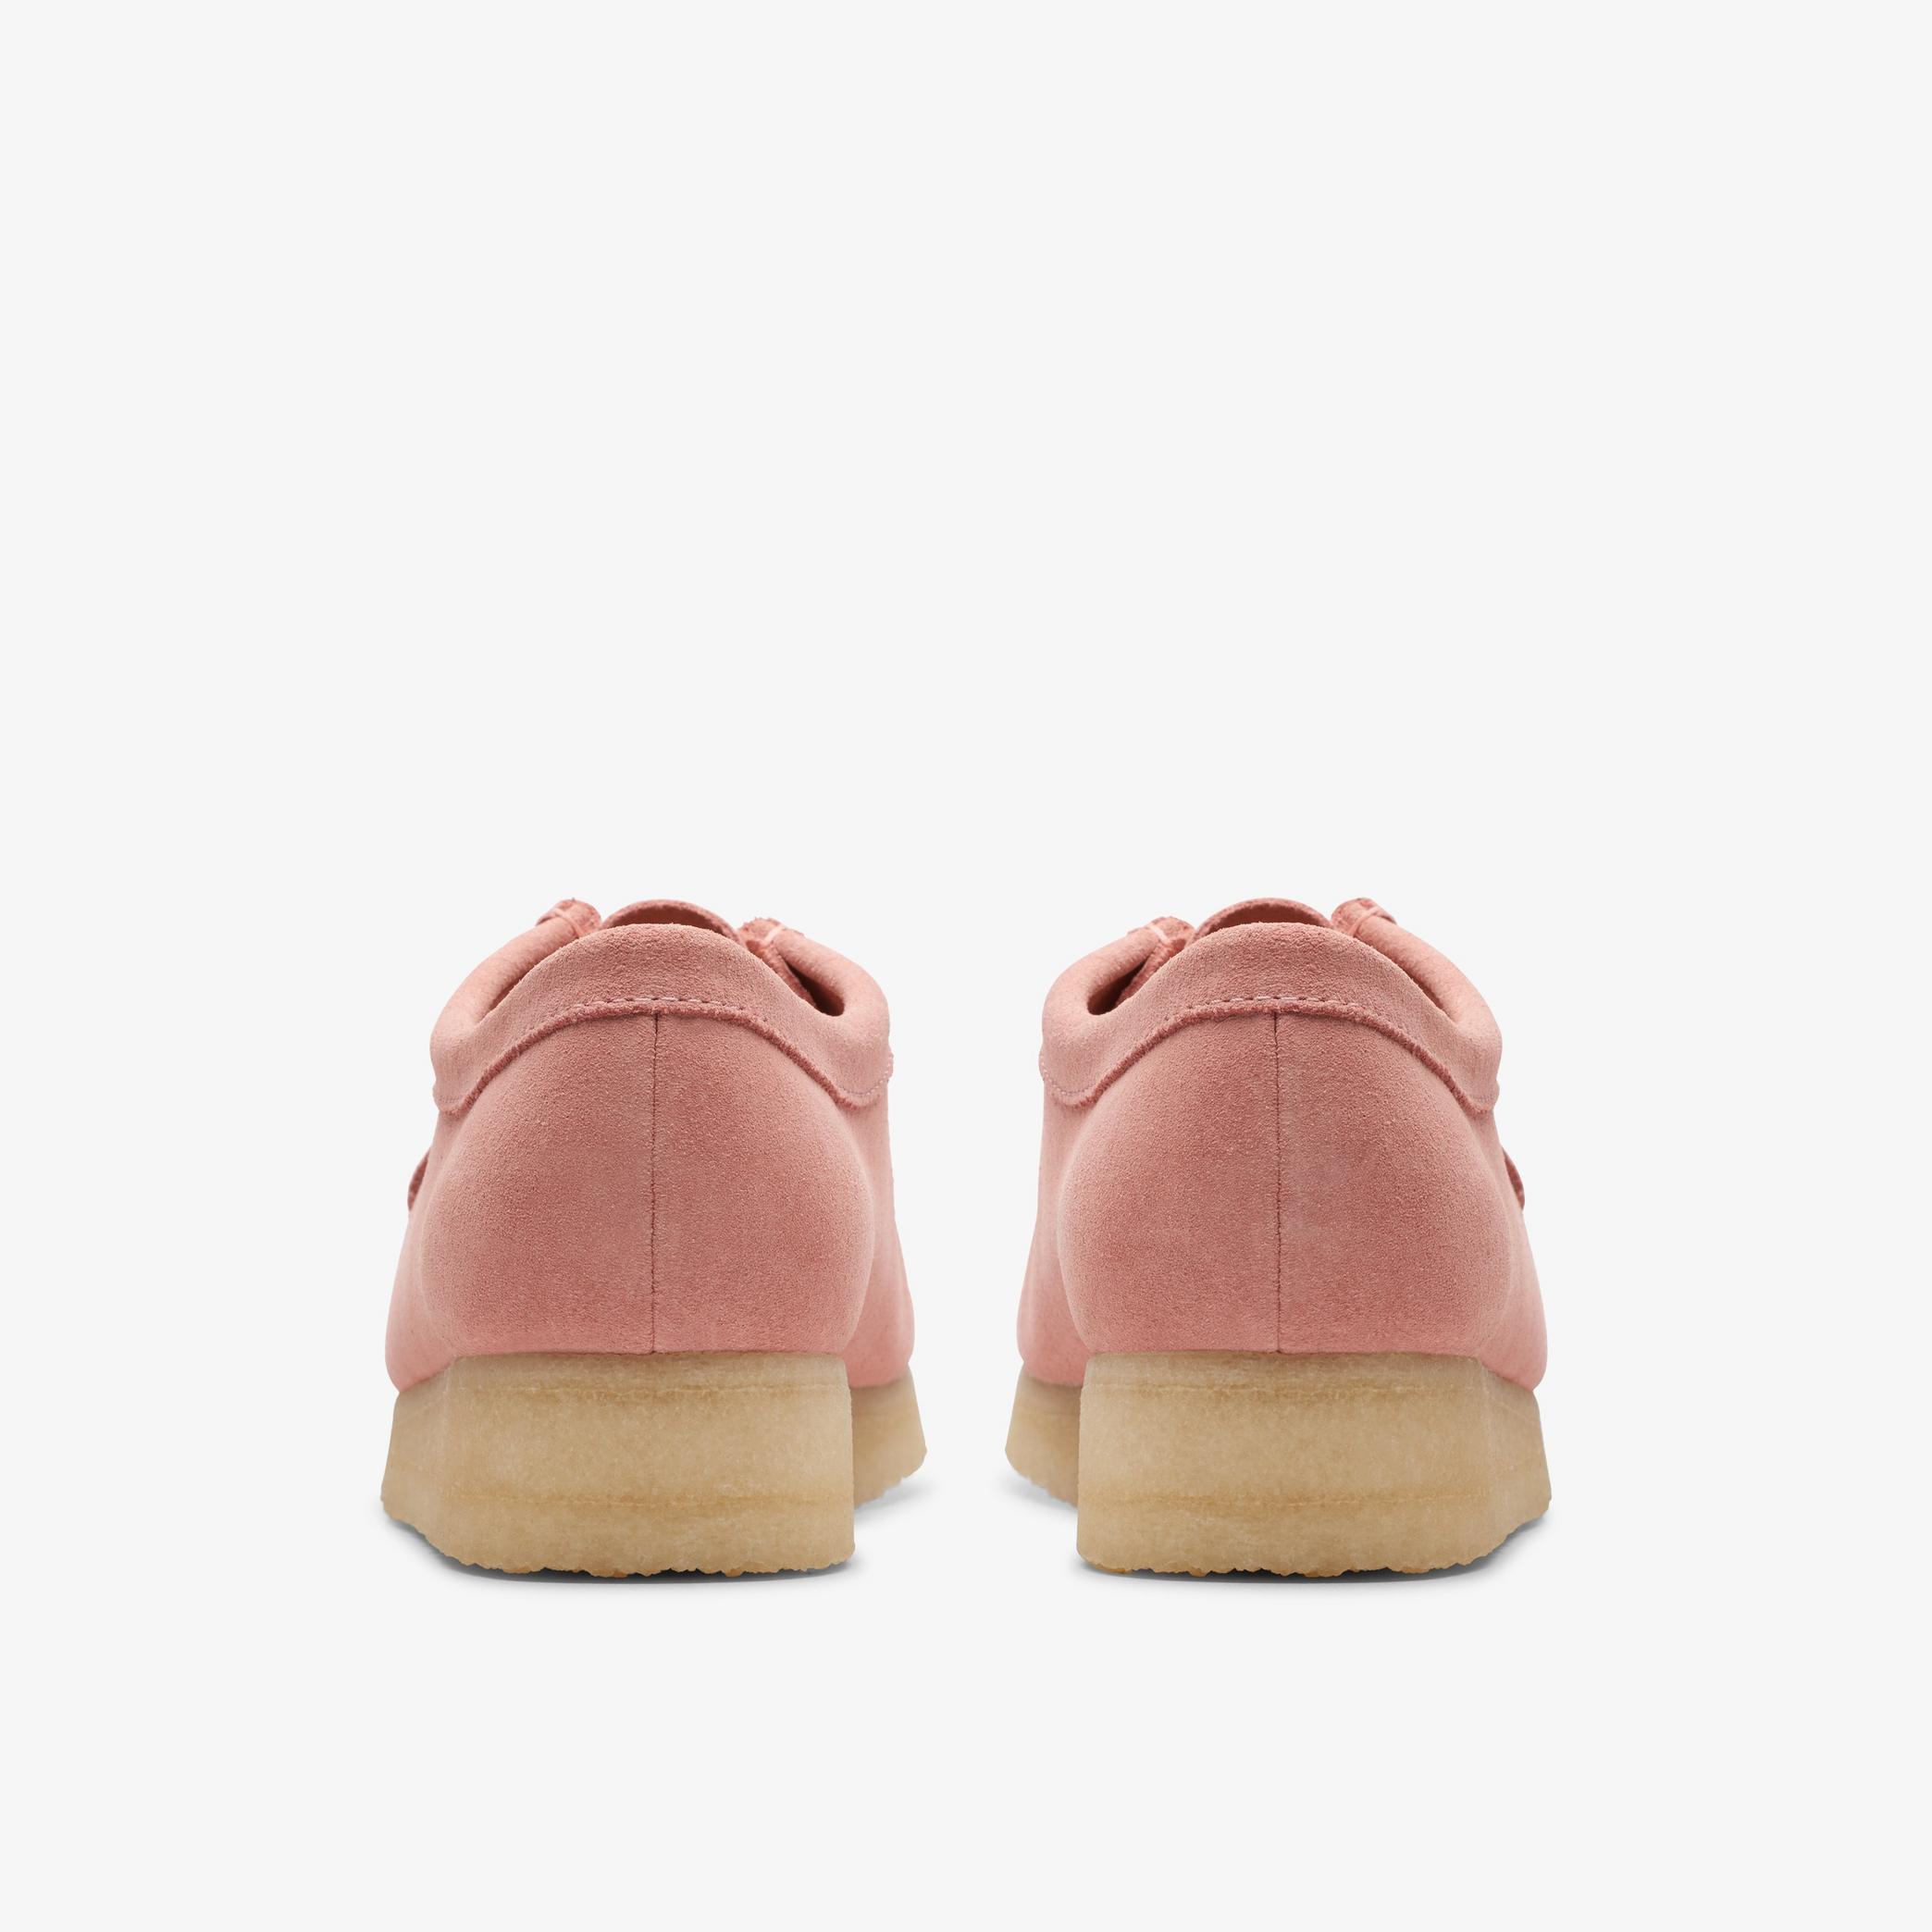 Wallabee Blush Pink Suede Wallabee, view 5 of 7